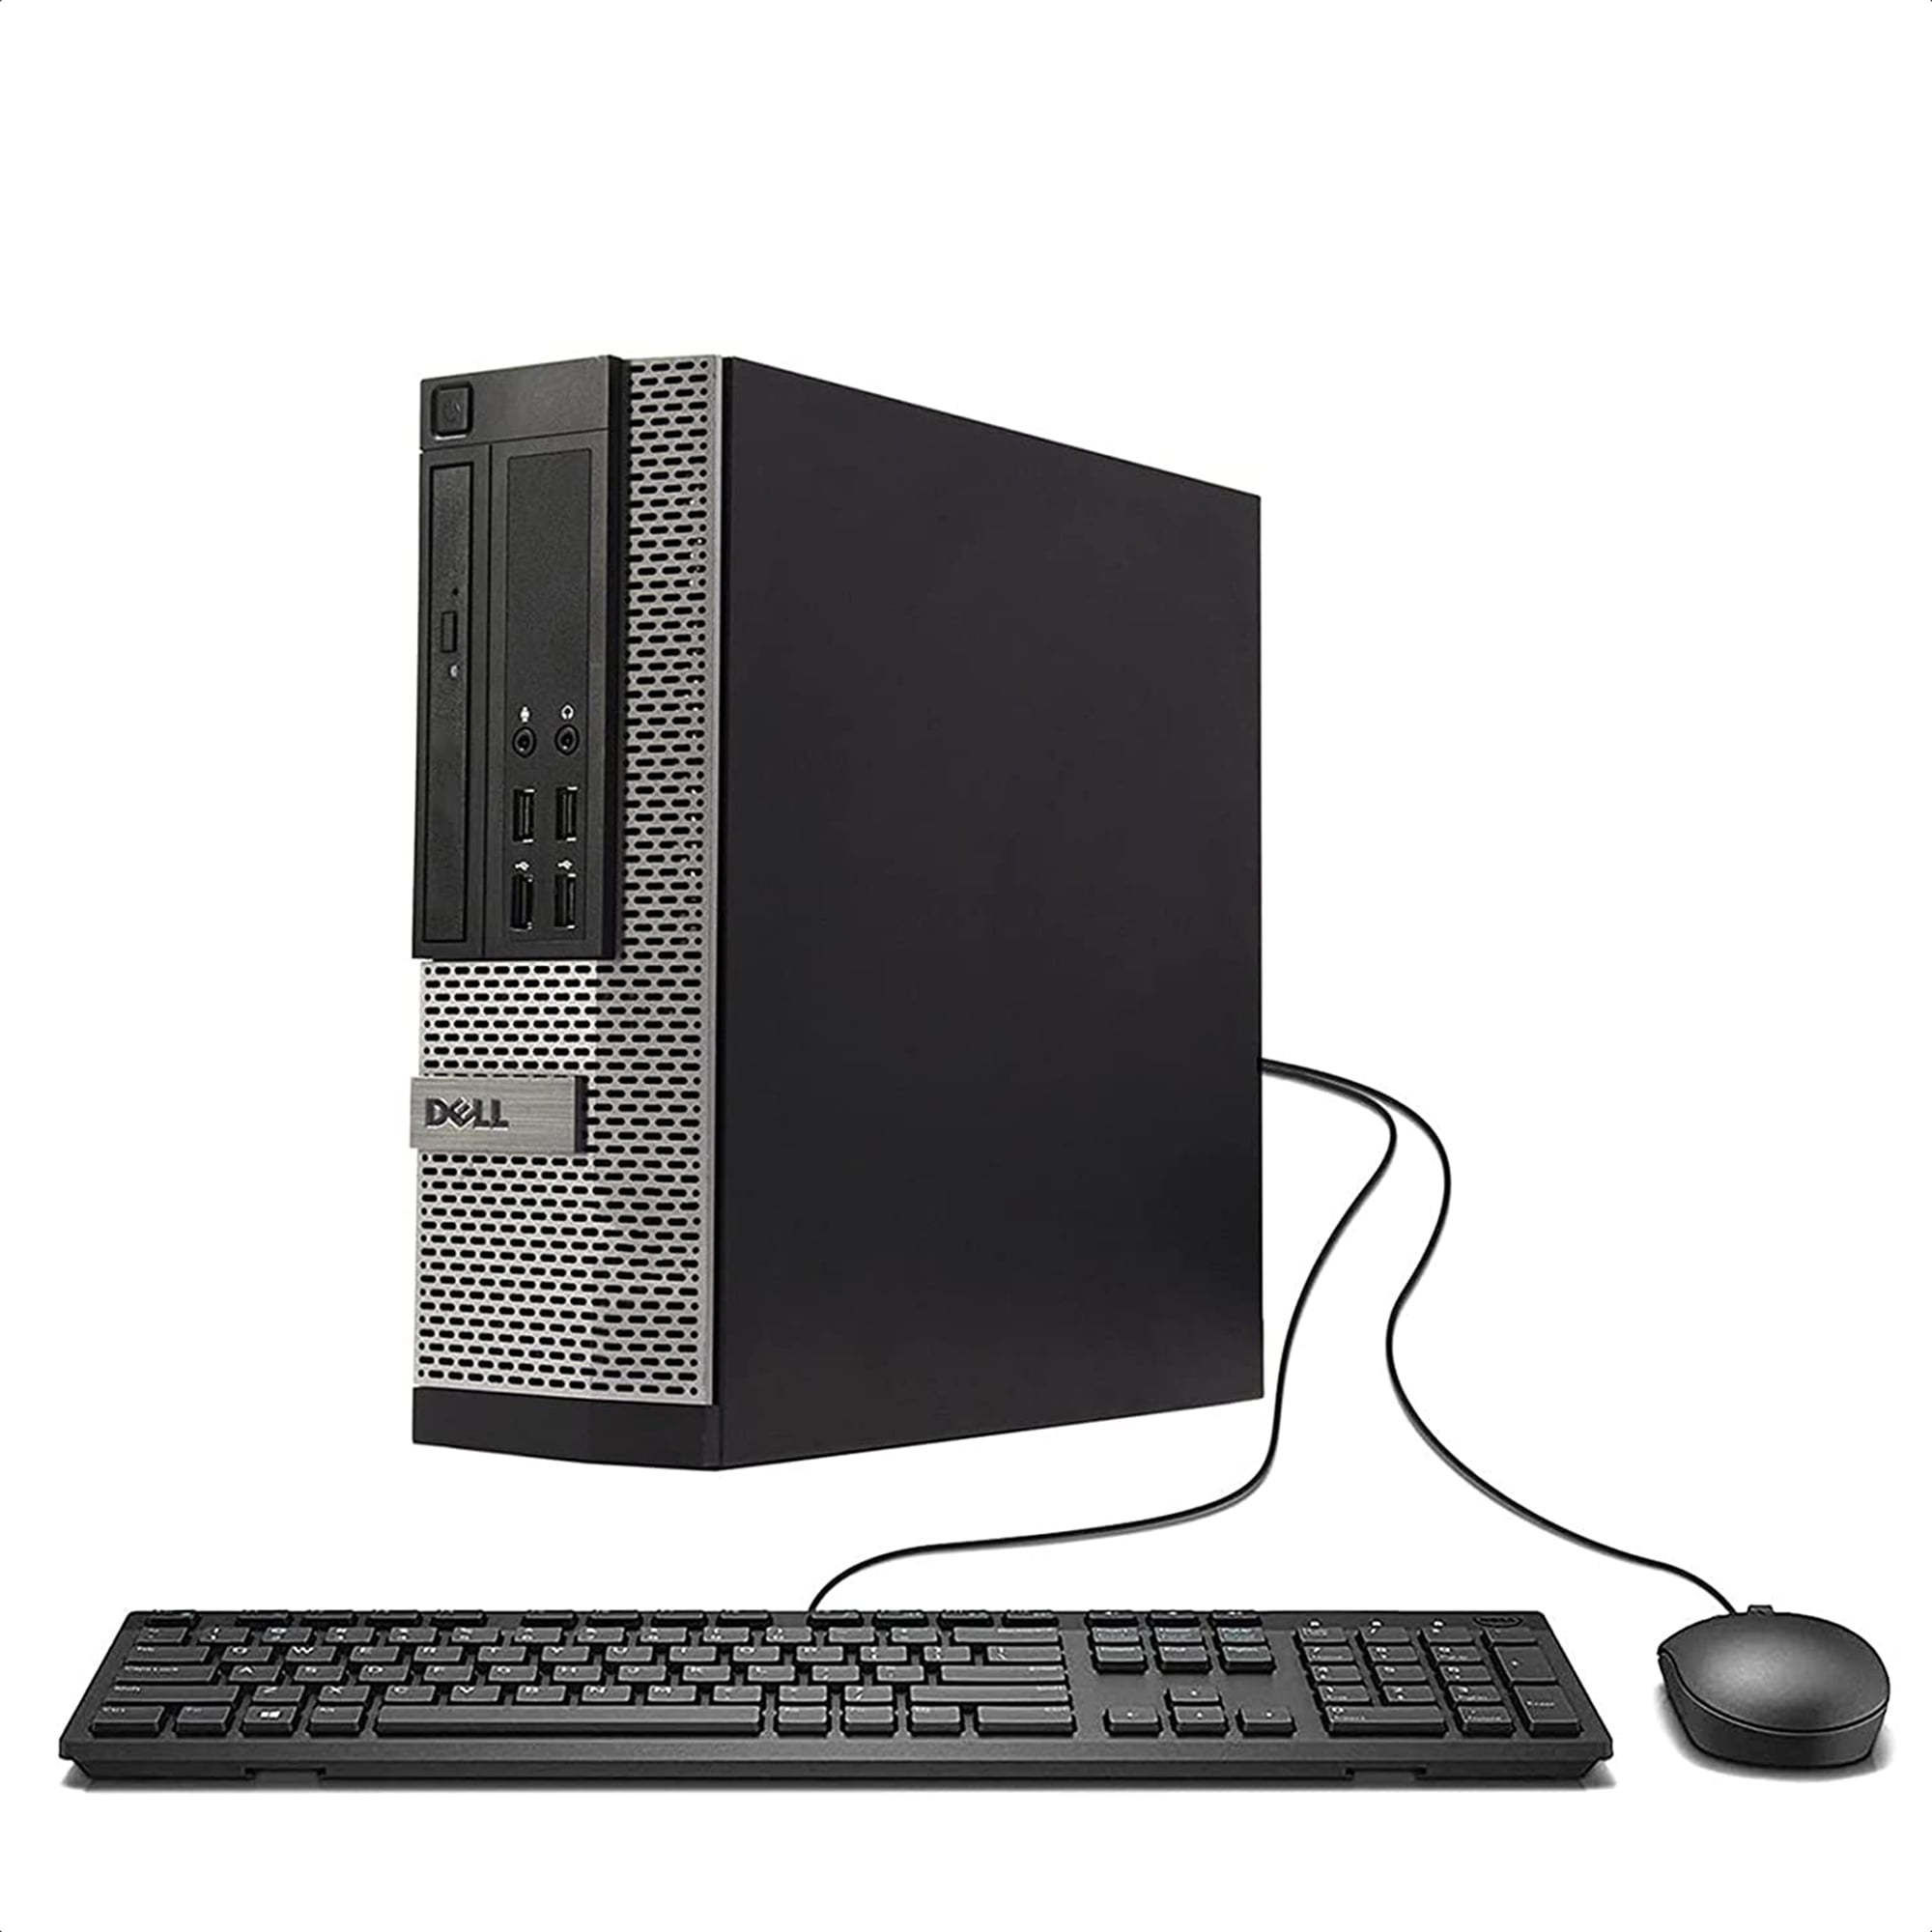 Dell OptiPlex 7010-T Desktop PC with Intel Core i5-2400 Processor, 16GB  Memory, 500GB Hard Drive and Windows 7 Pro (Monitor Not Included) - Used -  Like New 